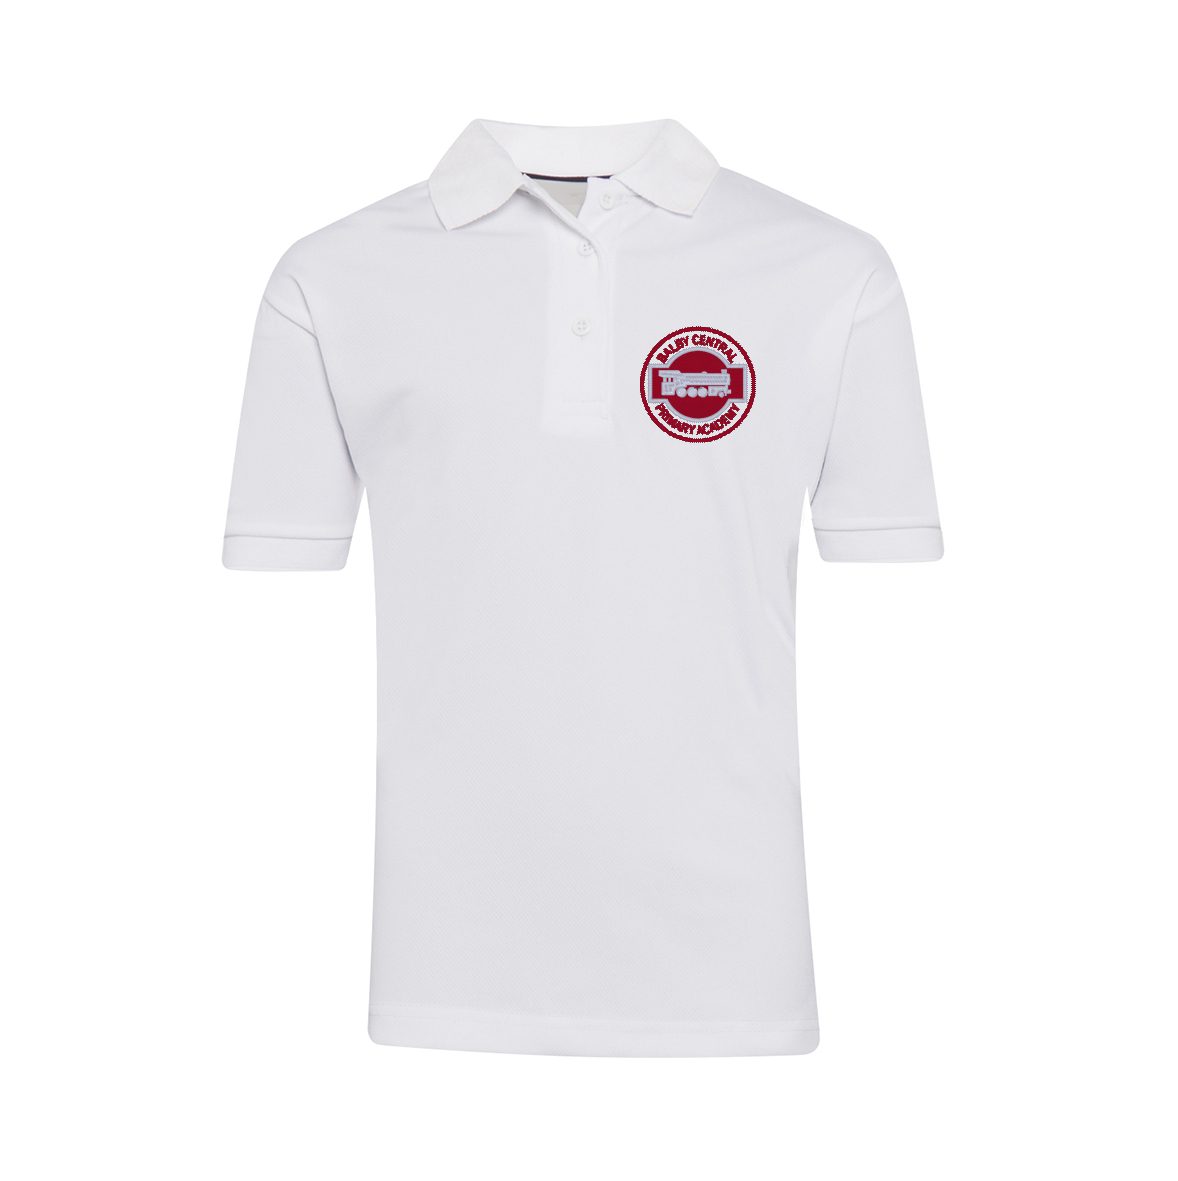 Balby Central White Polo Shirt w/Logo - Schoolwear Solutions